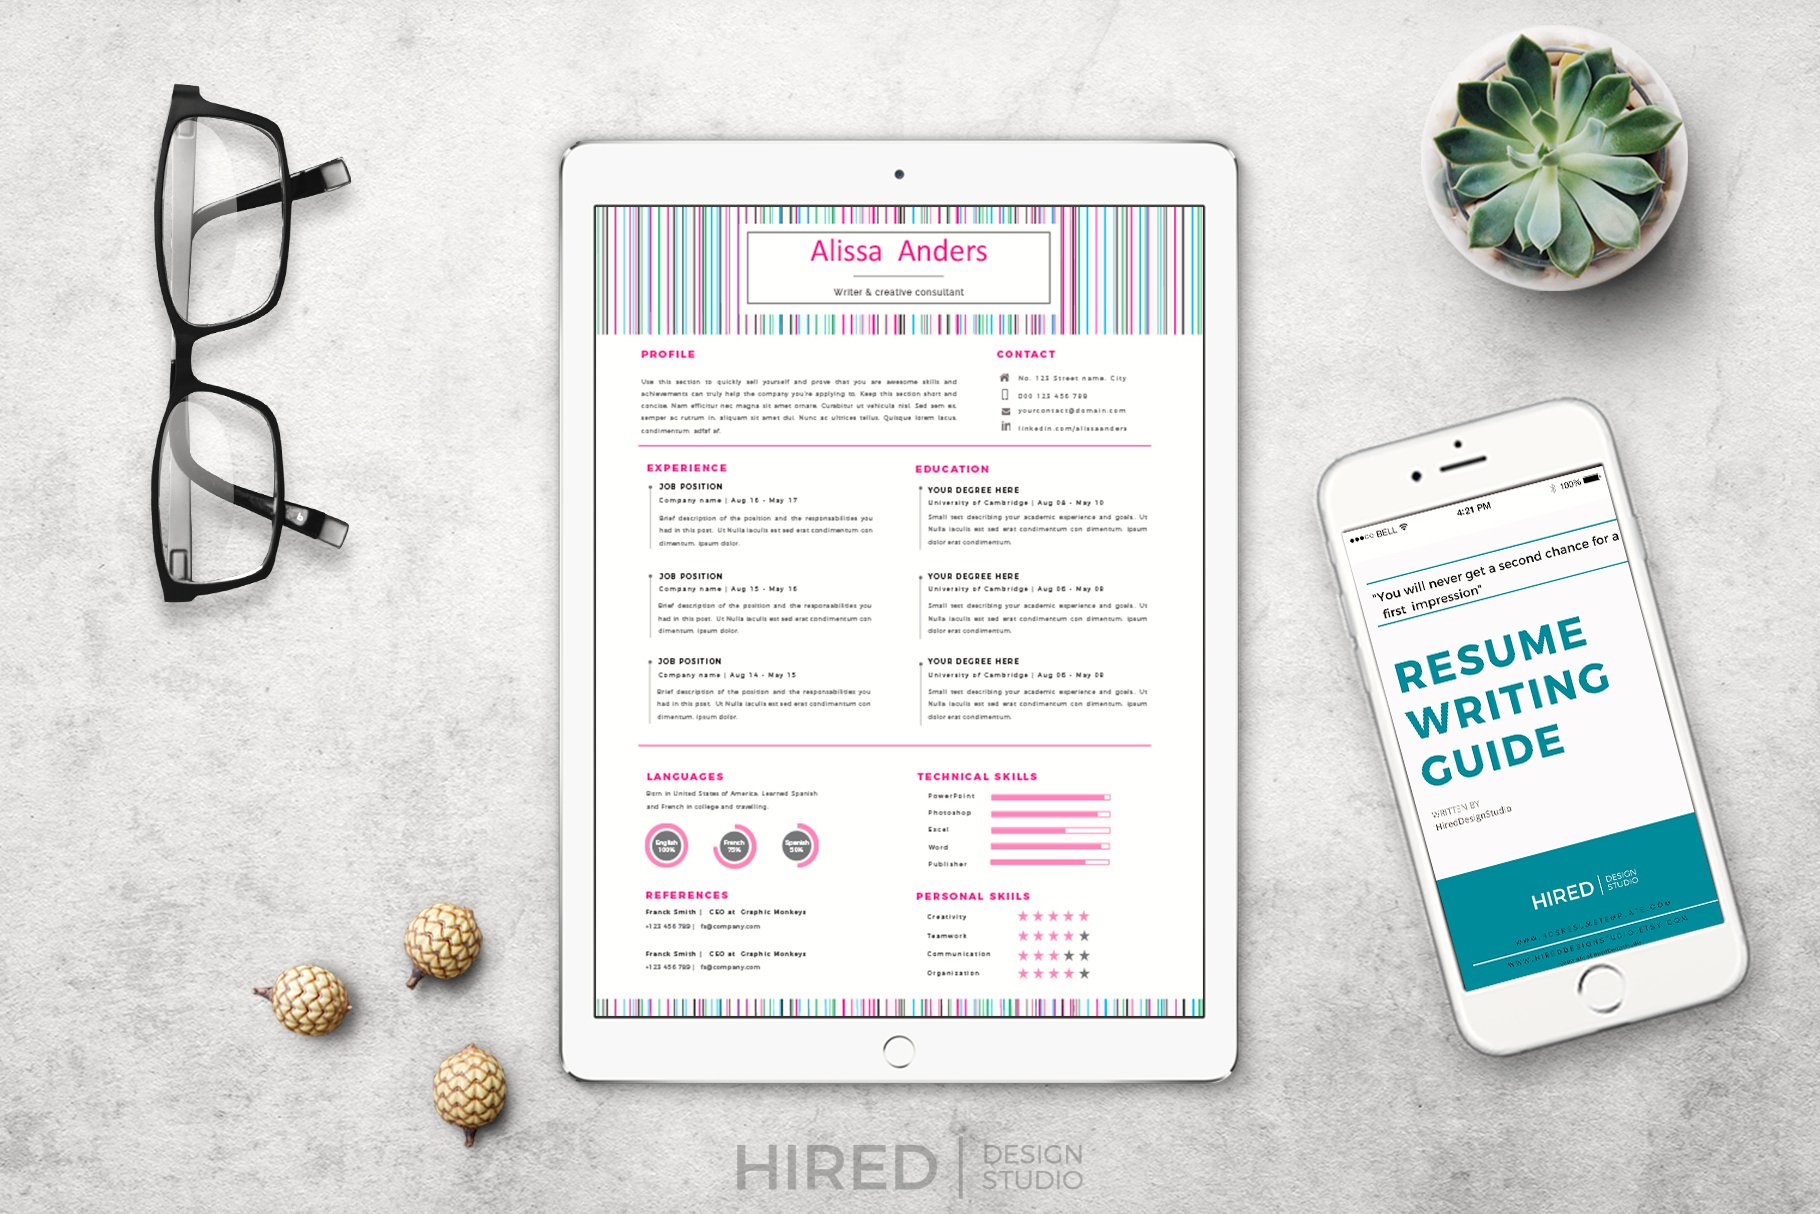 creative resume on ipad and pdf resume writing guide on mobile 15